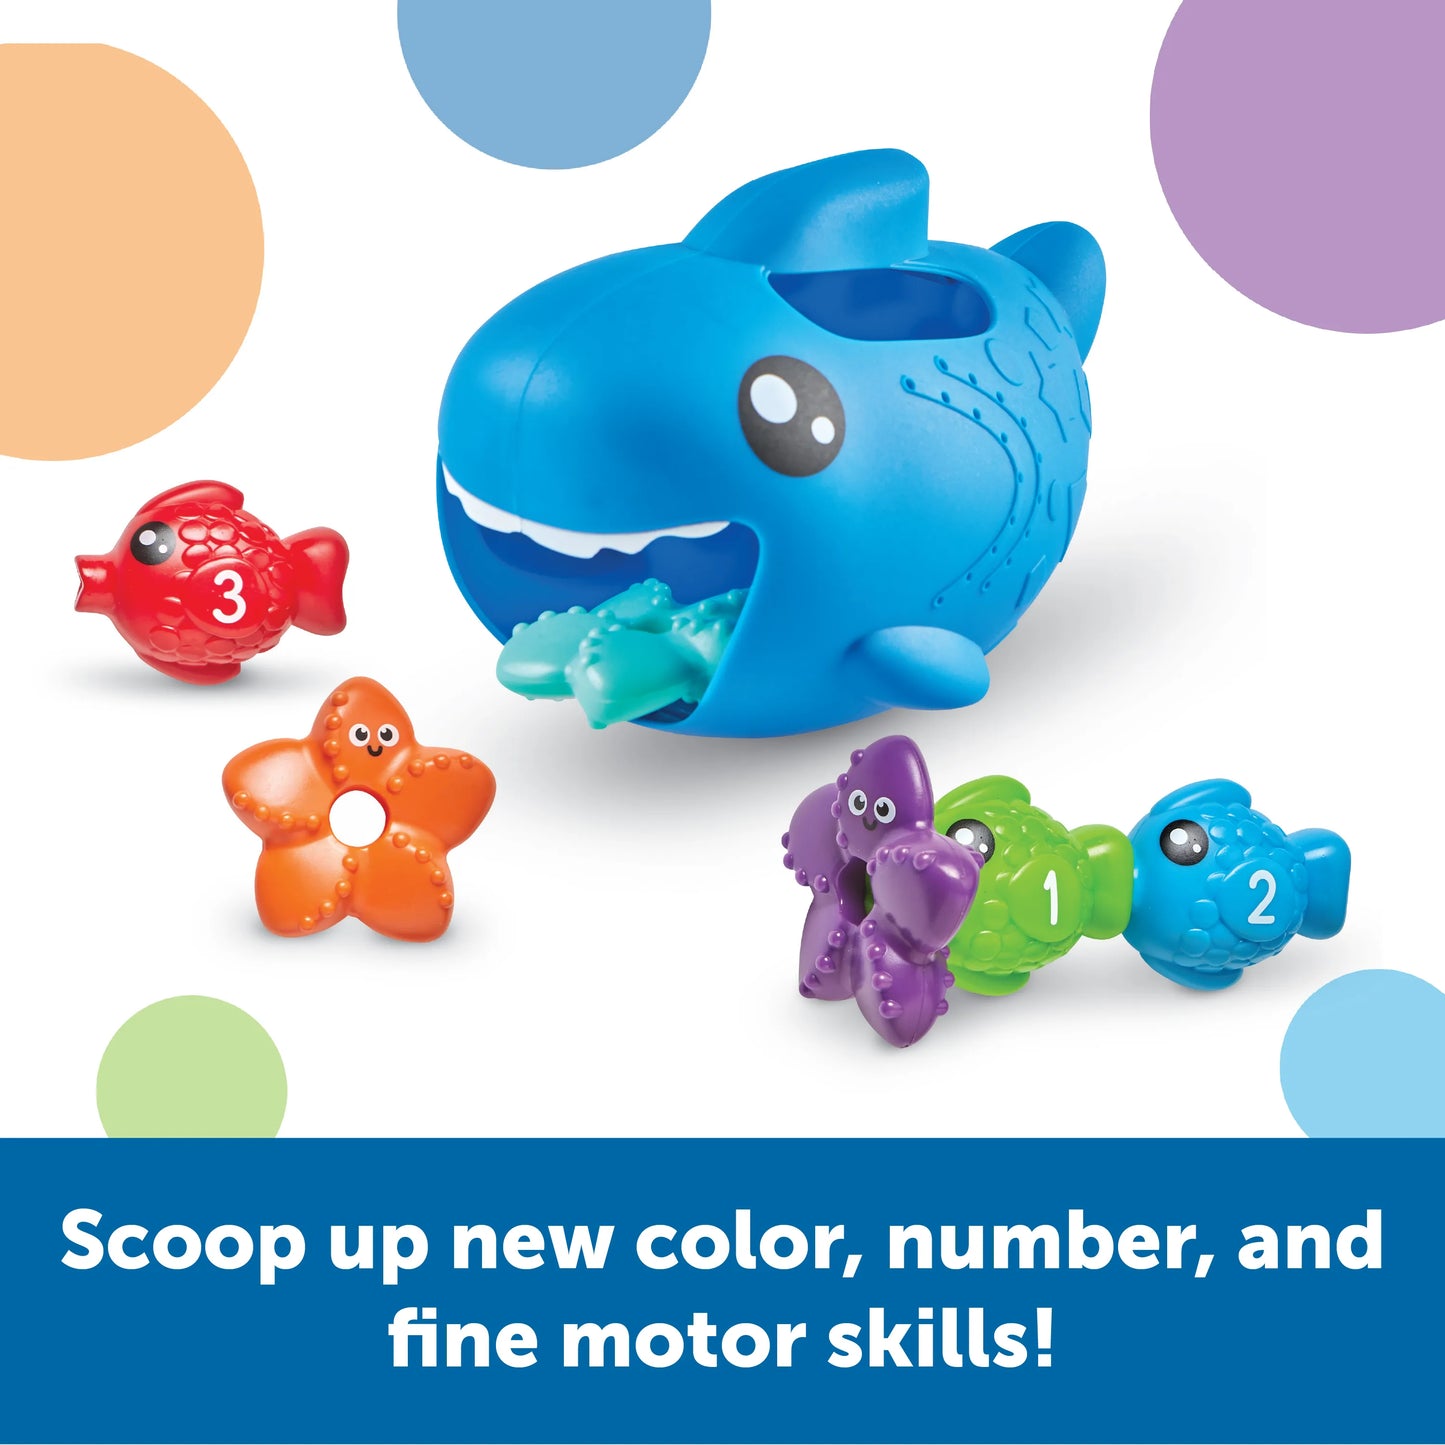 Learning Resources Steve the Scoop & Splash Shark Water Play Toys